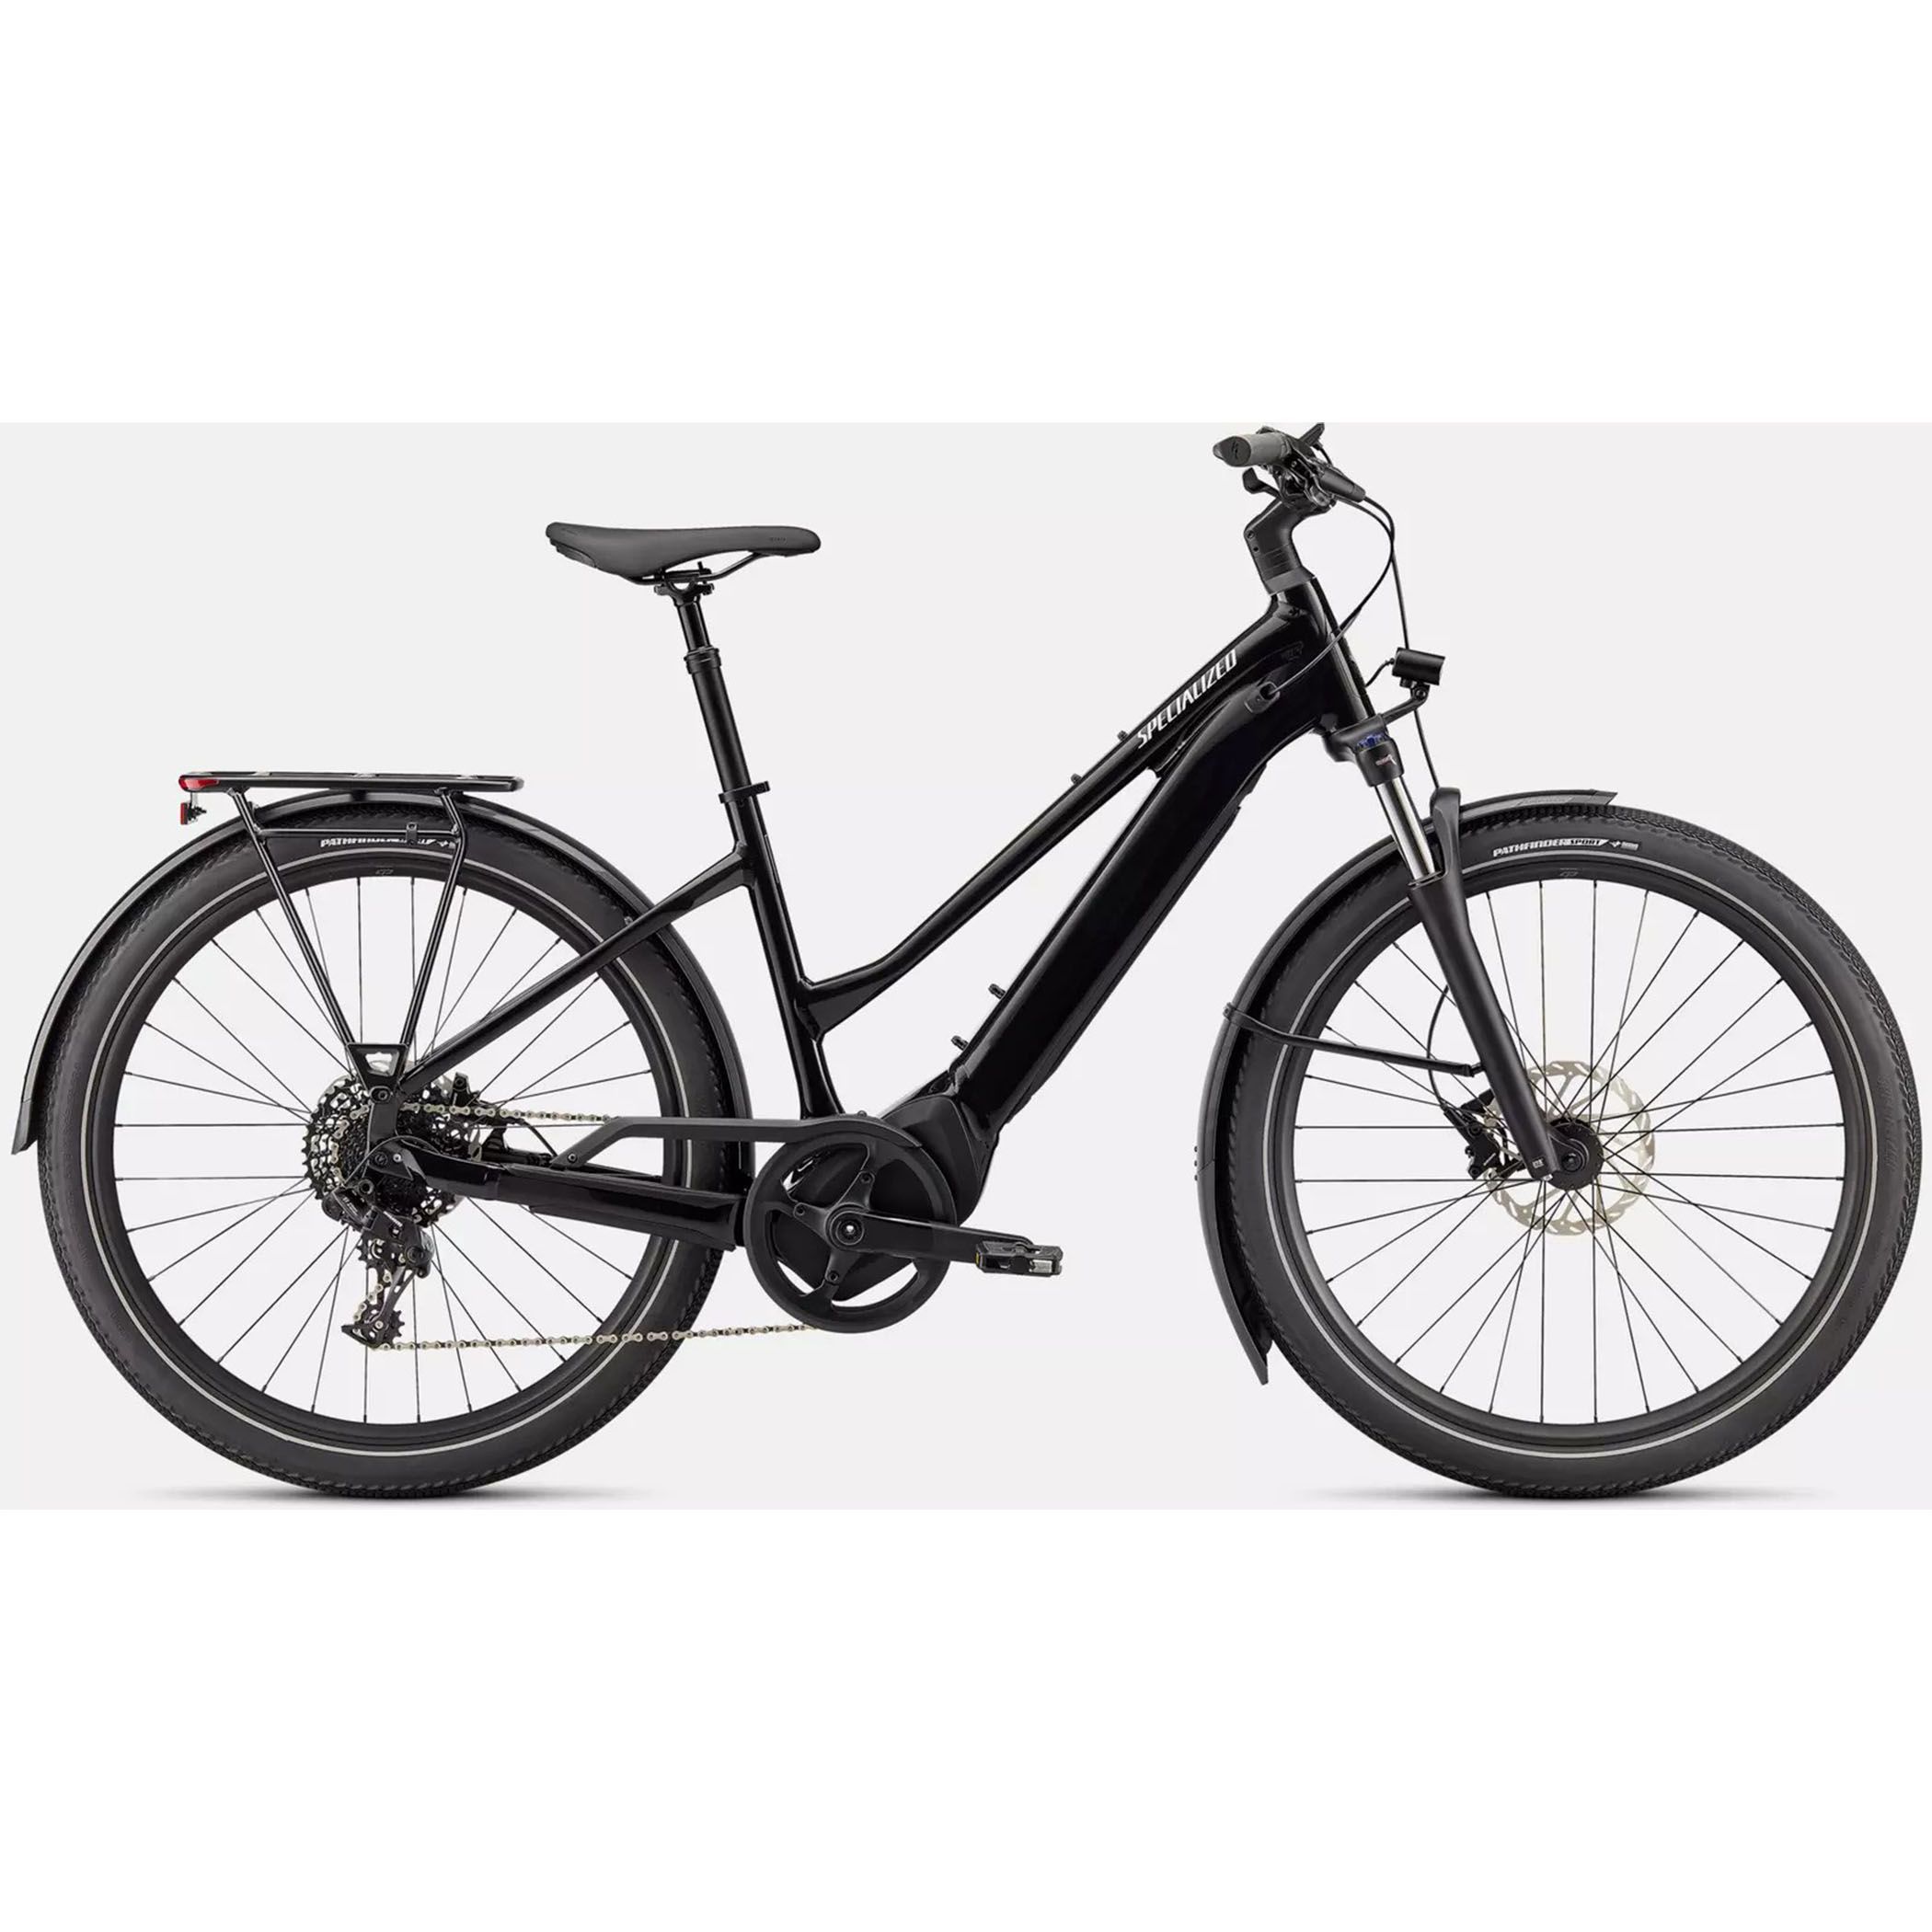 <p><strong>$3249.99</strong></p><p><a href="https://go.redirectingat.com?id=74968X1553576&url=https%3A%2F%2Fwww.specialized.com%2Fus%2Fen%2Fturbo-vado-40-step-through%2Fp%2F206161%3Fcolor%3D348393-206161&sref=https%3A%2F%2Fwww.roadandtrack.com%2Fgear%2Flifestyle%2Fg46464030%2Fbest-electric-bikes%2F">Shop Now</a></p><p><em>Road & Track</em> readers know: If you want the best, it's going to cost you. The Specialized Turbo Vado 4.0 stands out for its exceptional design, seamless integration of components, and superior ride quality, making it an excellent choice for both seasoned cyclists and first-time e-bicycle users. </p><p>The folks at <em>Bicycling</em> heaped on the praise by adding, "We have ridden a lot of e-bikes over the years, and the Specialized Turbo models consistently test among the best in all categories. The brand puts a ton of development time into its Turbo series e-bikes.... This work pays off with best-in-class ride quality." </p><p>There are lots of options available for the Turbo Vado, including several colors, traditional or step-through frames, and a few drivetrain configurations. A full-spec Turbo Vado 4.0 can top out at over $5500, so choose your options carefully. </p>